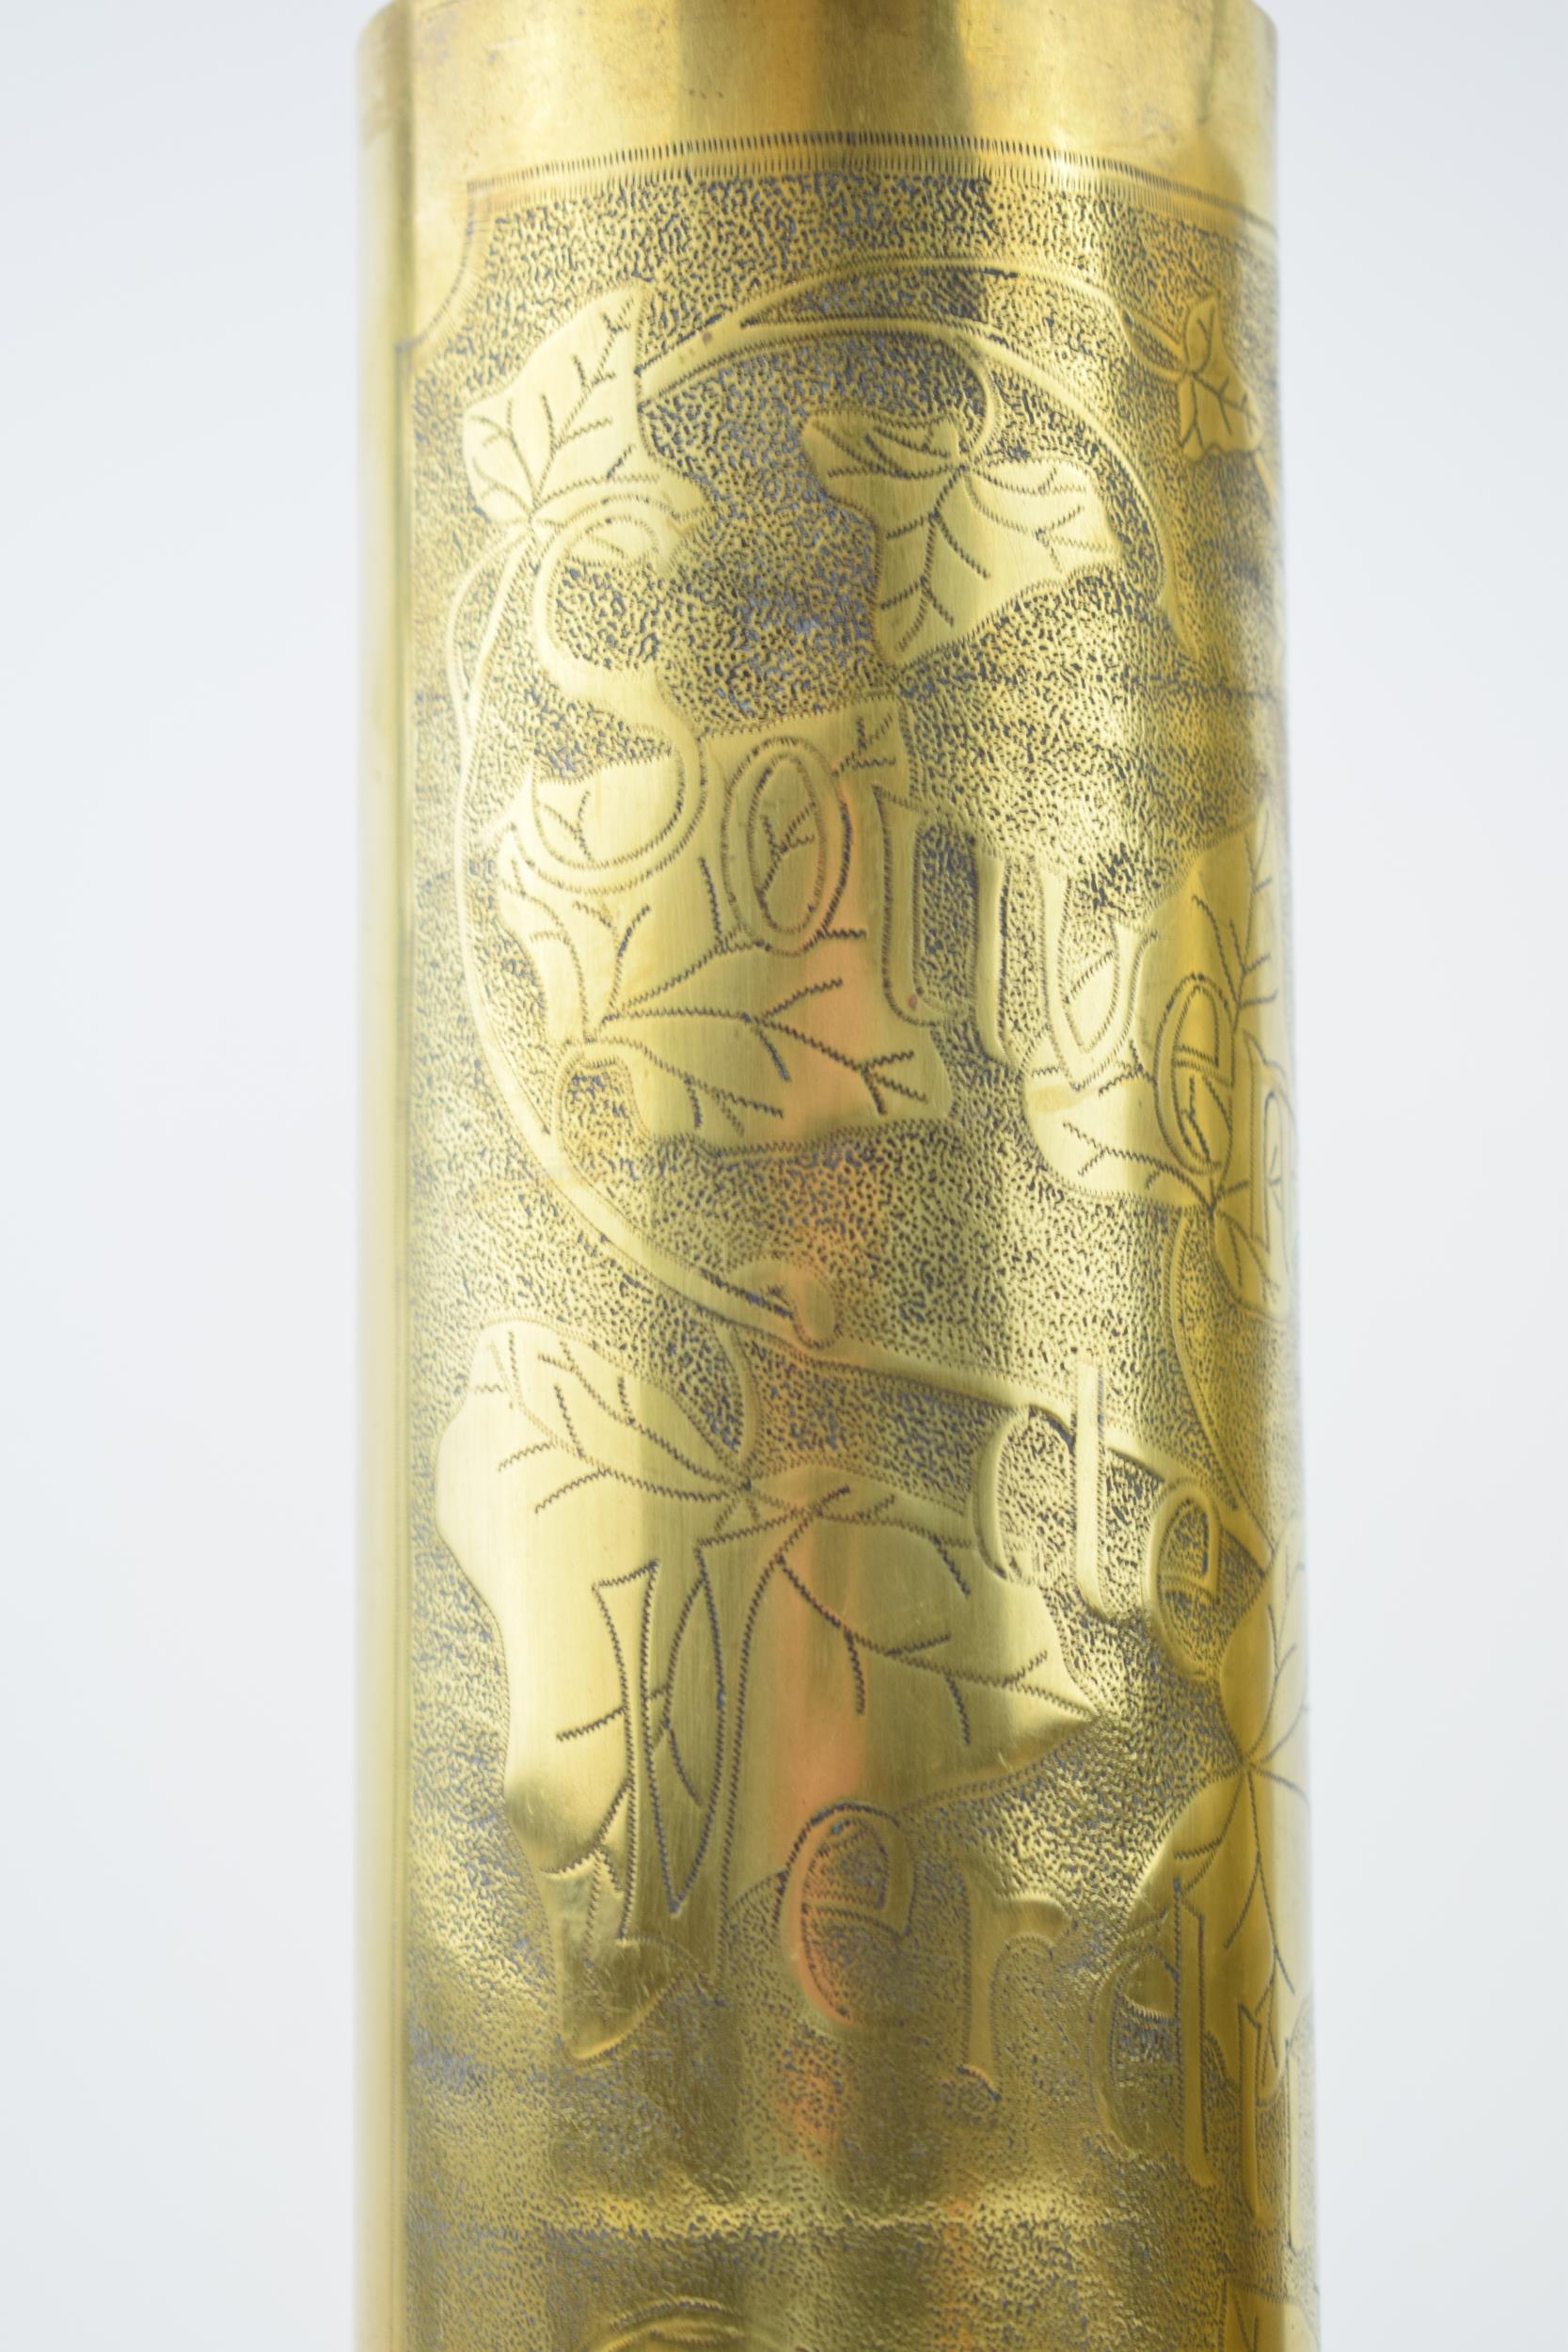 A pair of Trench Art vases, 29cm tall, engraved decoration ‘Souvenir de Verdun’, one being 1915 - Image 3 of 6